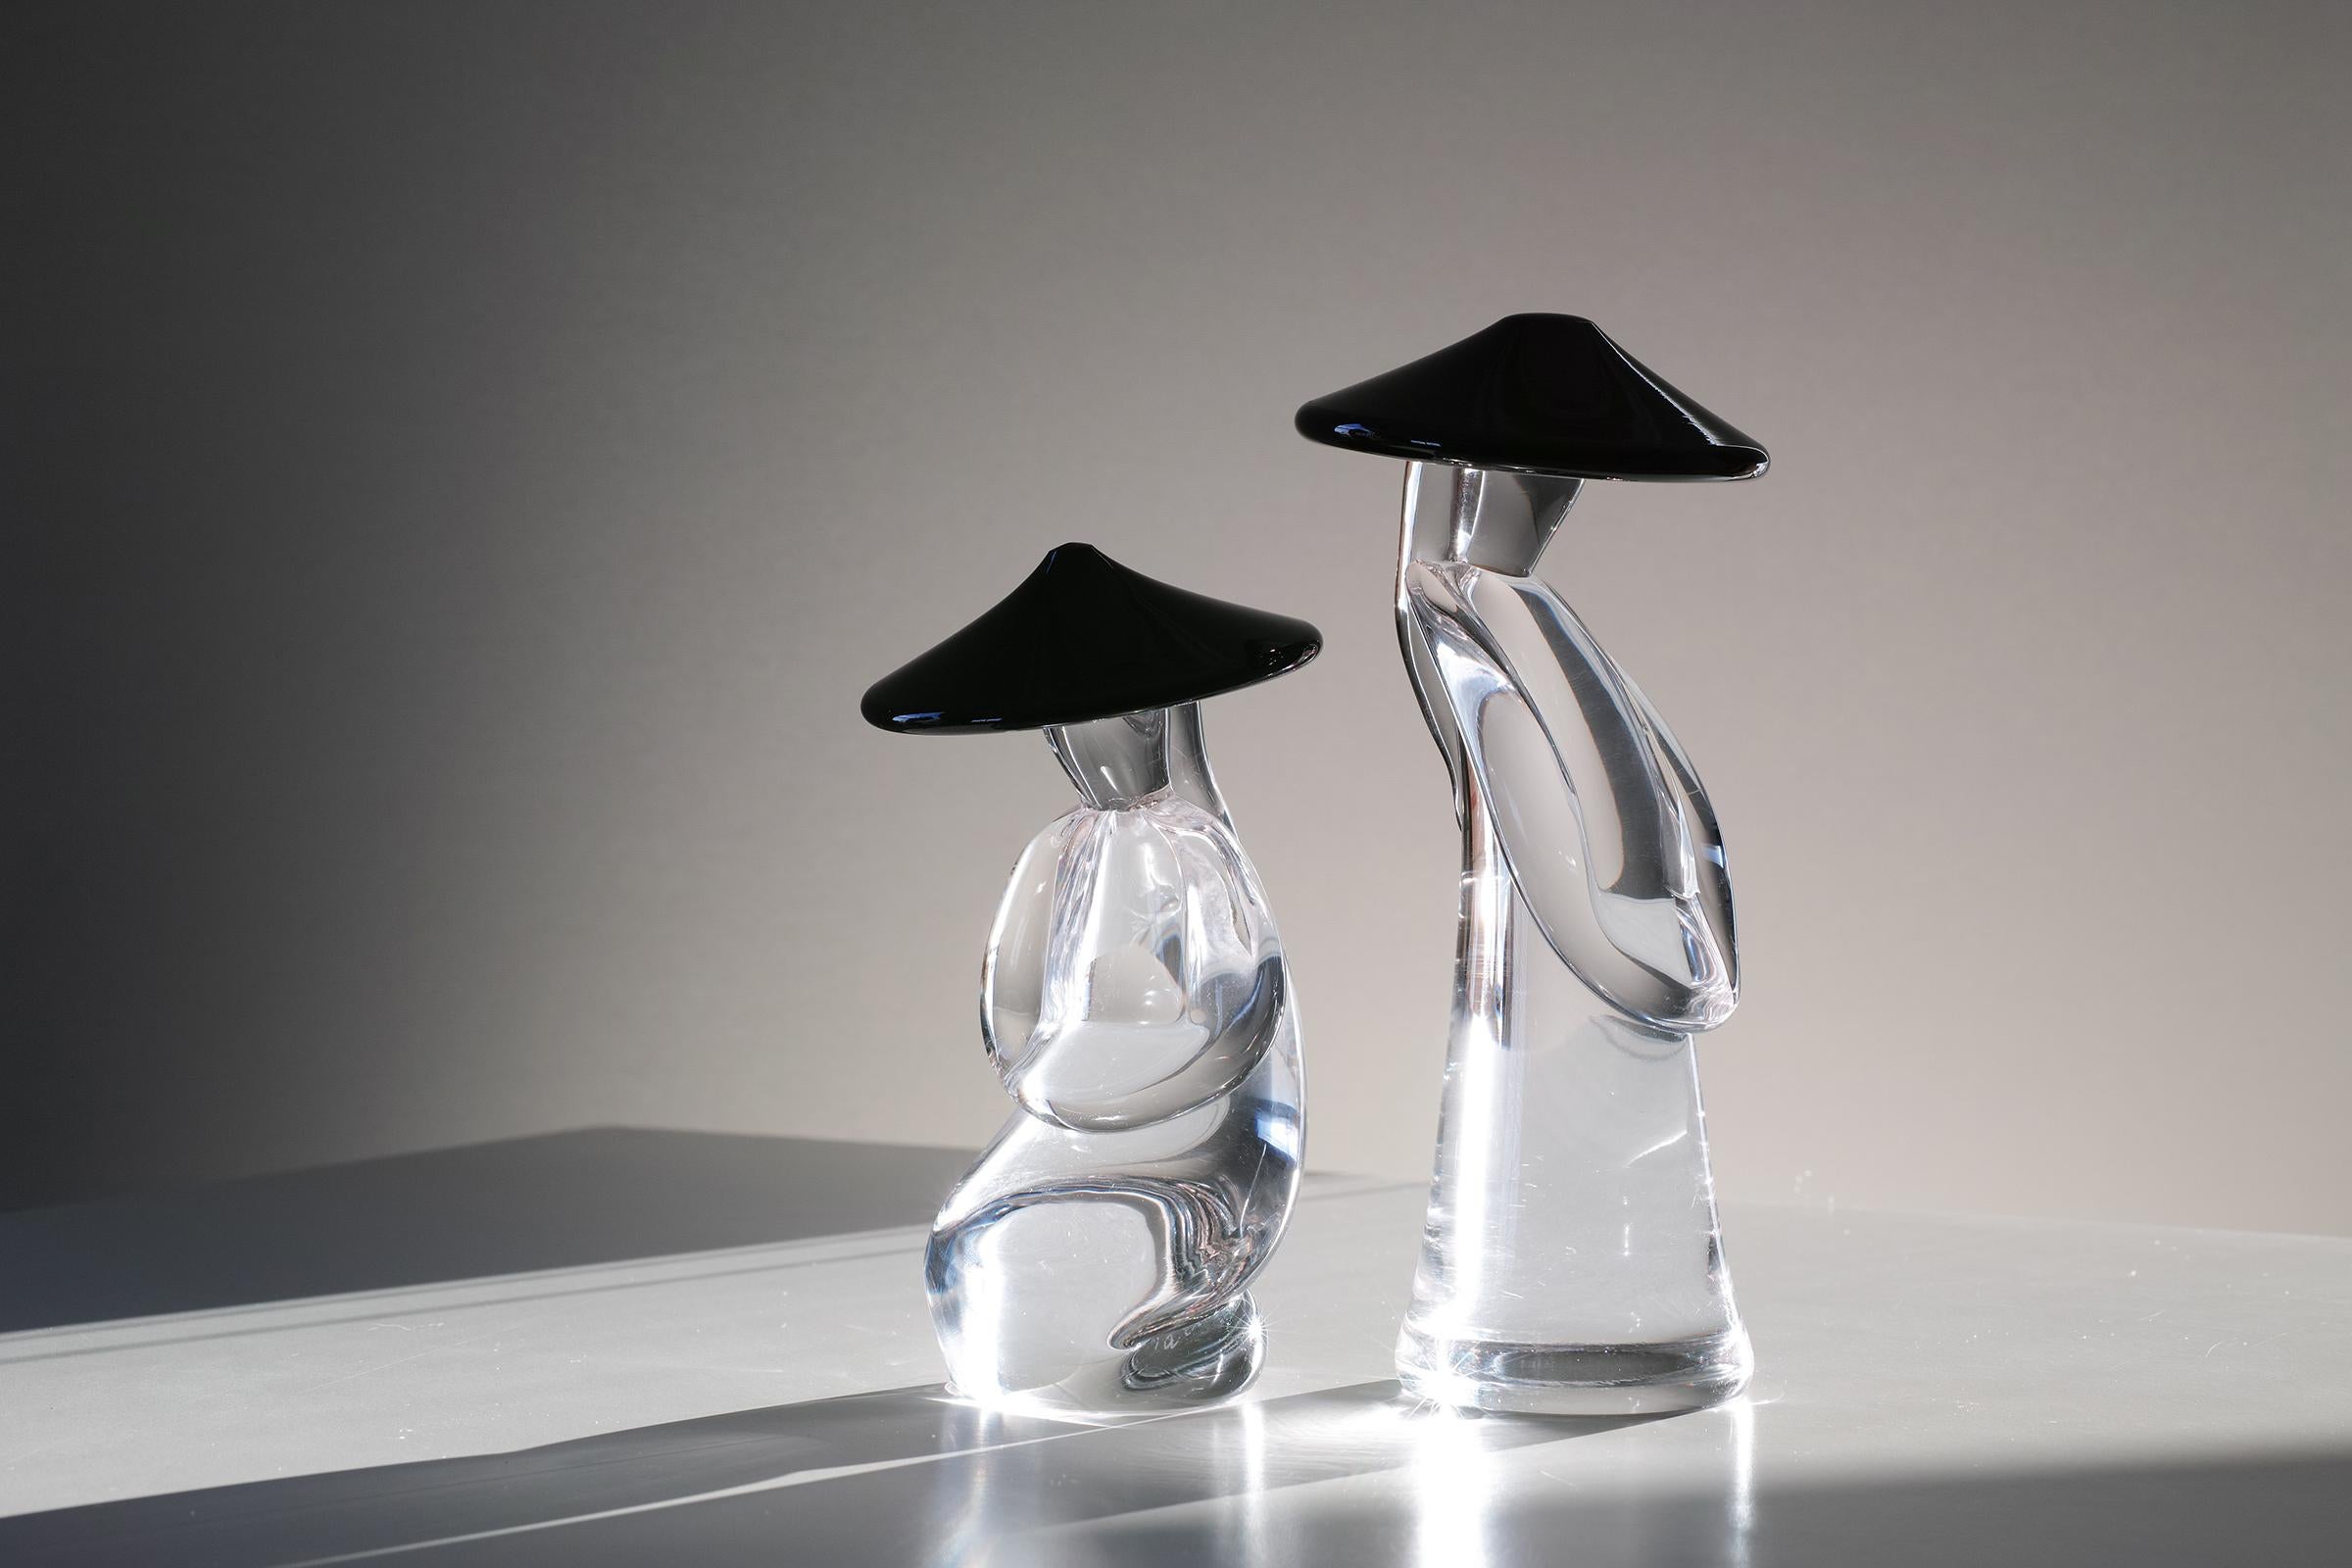 For your consideration is this signed pair of Murano figural sculptures by Renato Anatra. The figures are comprised of heavy, clear crystal and opaque black crystal. Both are hand signed on the bottom and one has the original Vetri Murano